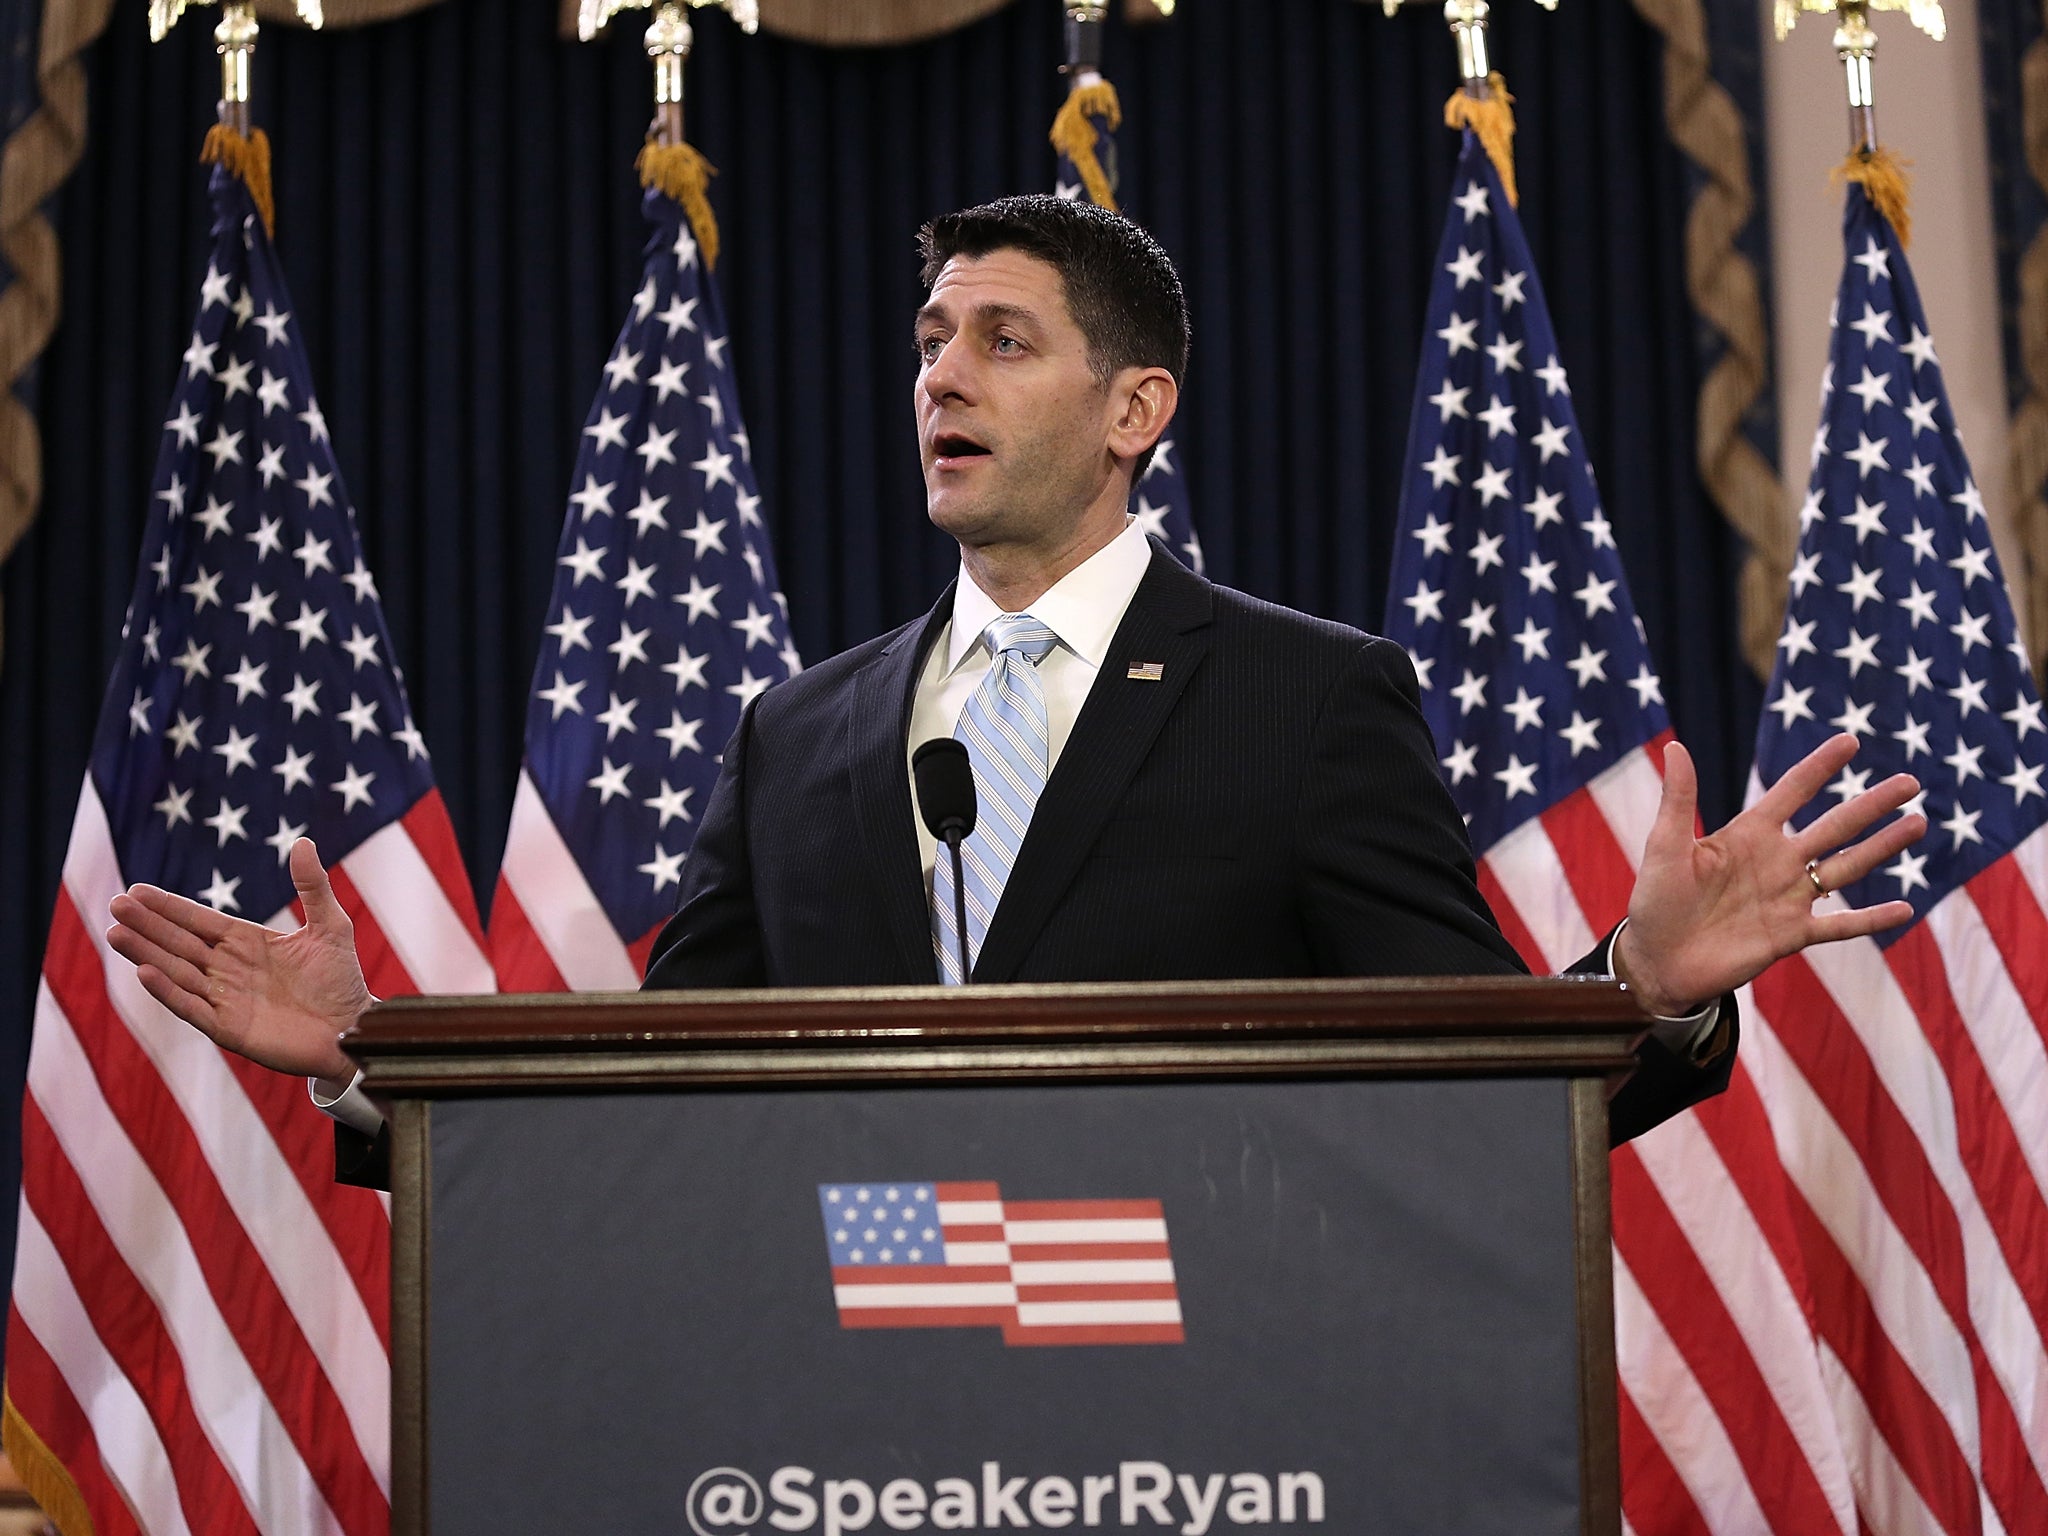 Paul Ryan delivering a speech on the state of US politics Win McNamee/Getty